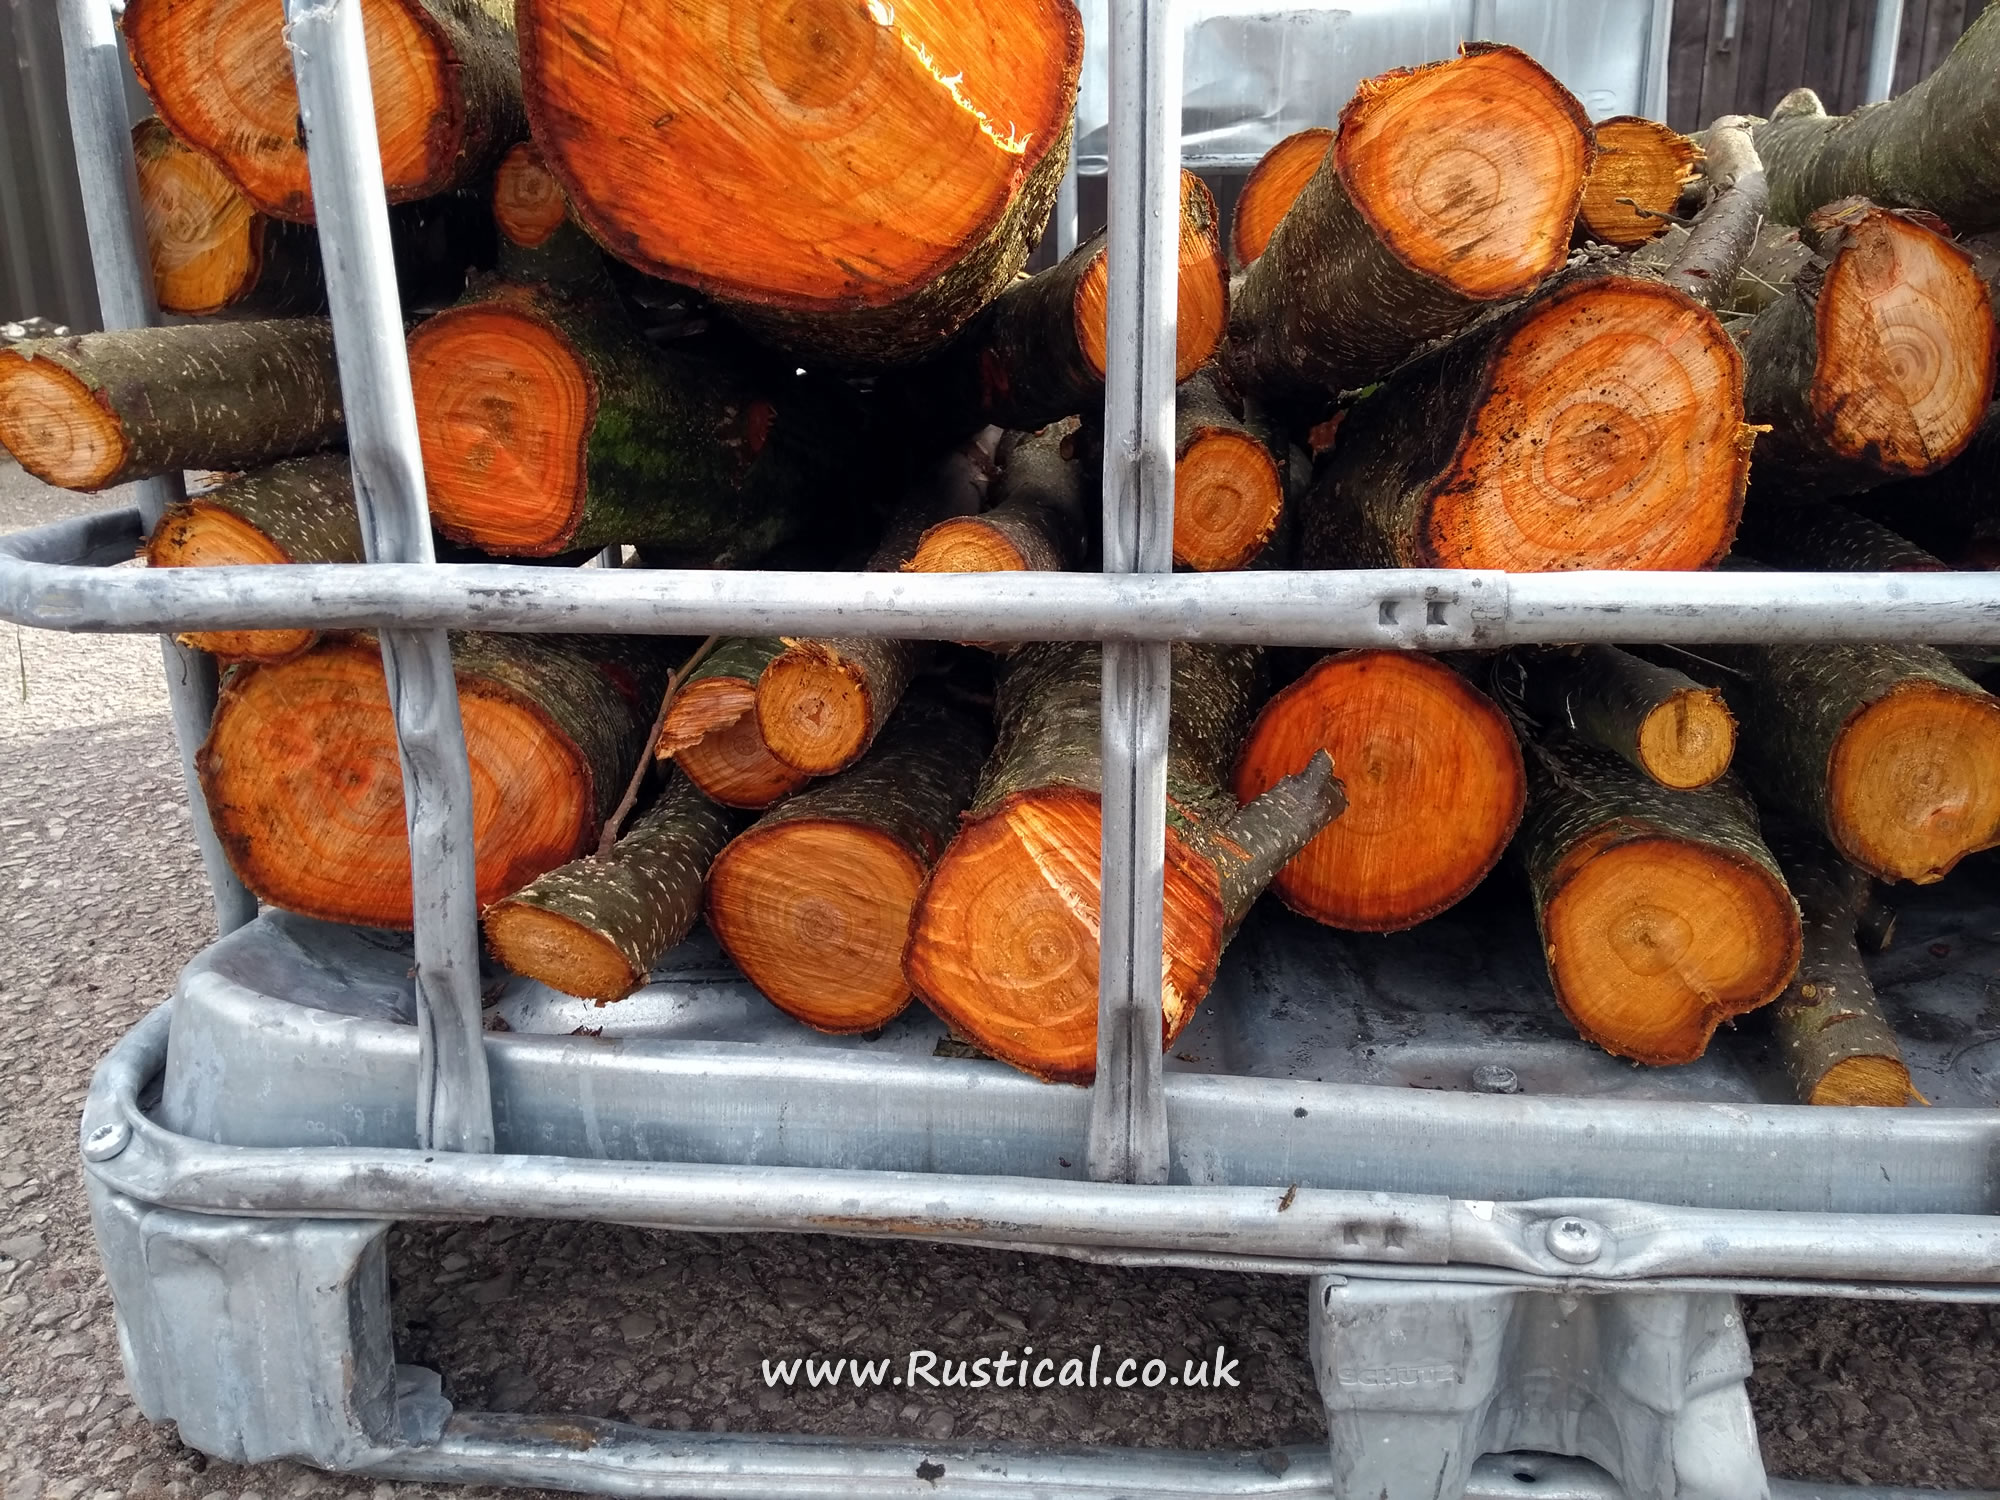 Coppiced Alder stacked in an IBC crate to season